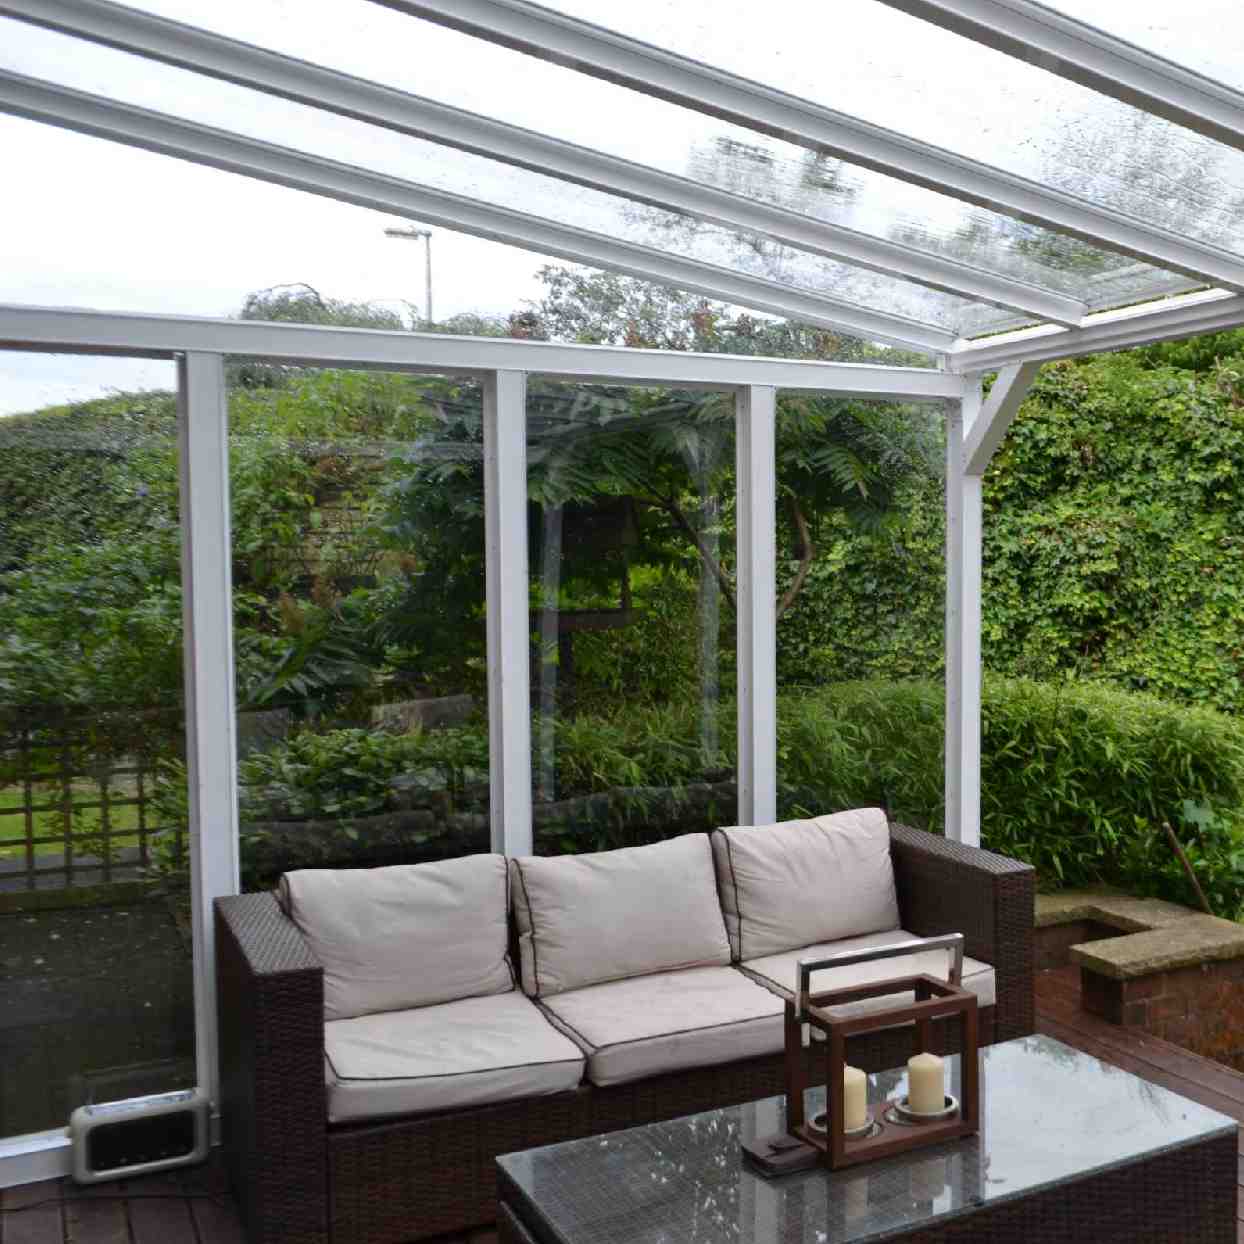 Buy Omega Verandah White with 6mm Glass Clear Plate Polycarbonate Glazing - 8.4m (W) x 3.5m (P), (4) Supporting Posts online today